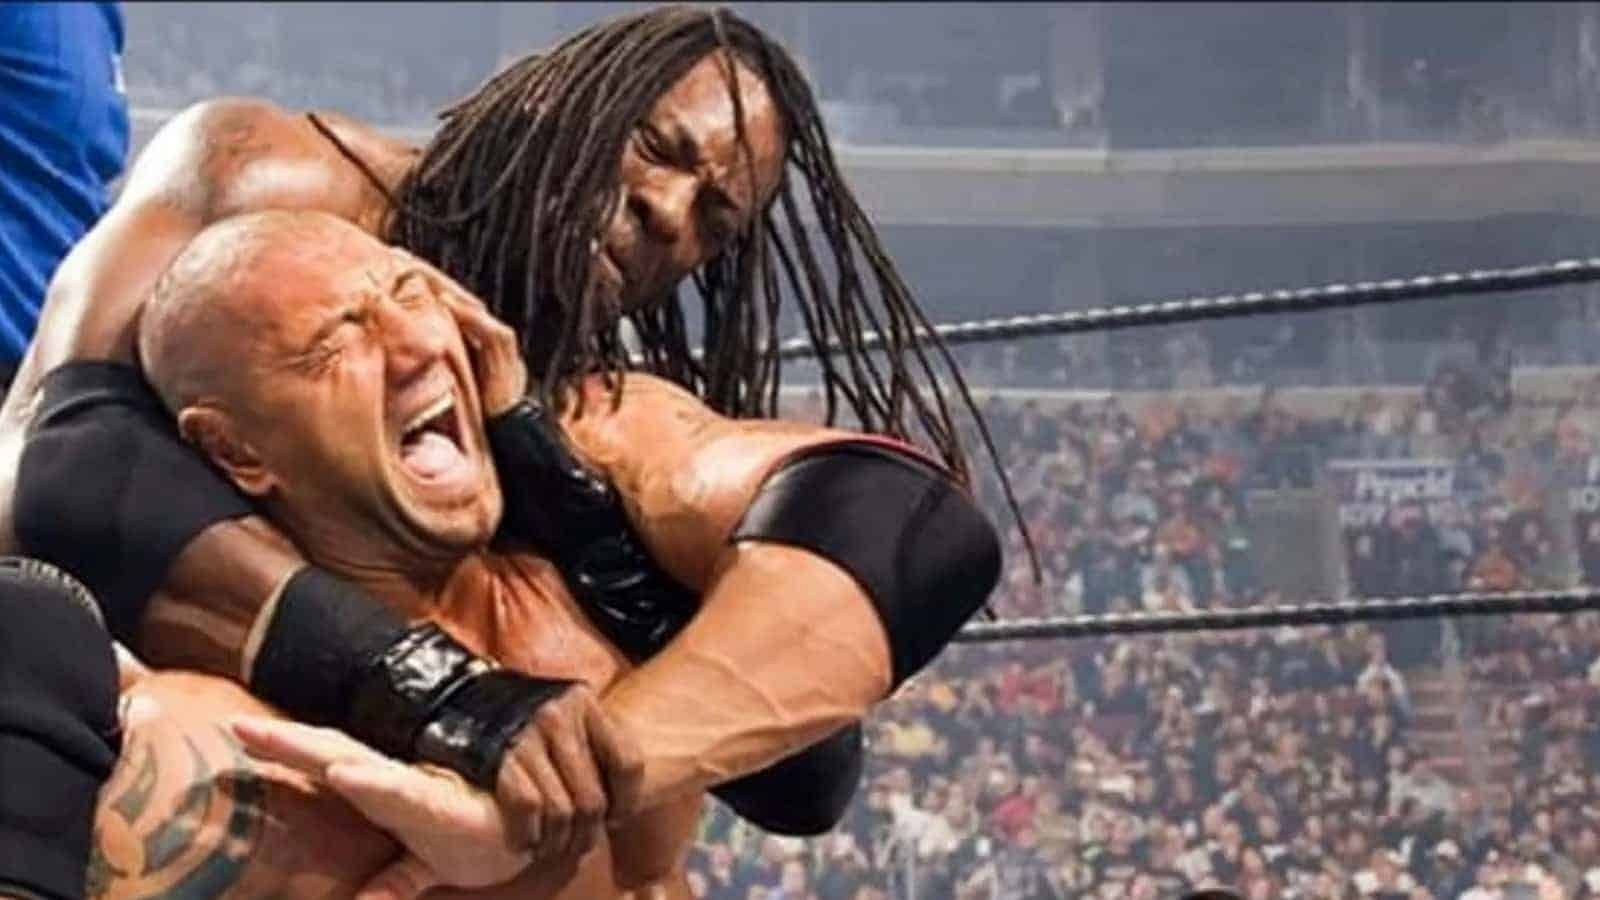 Booker T and Batista had a notable rivalry in WWE